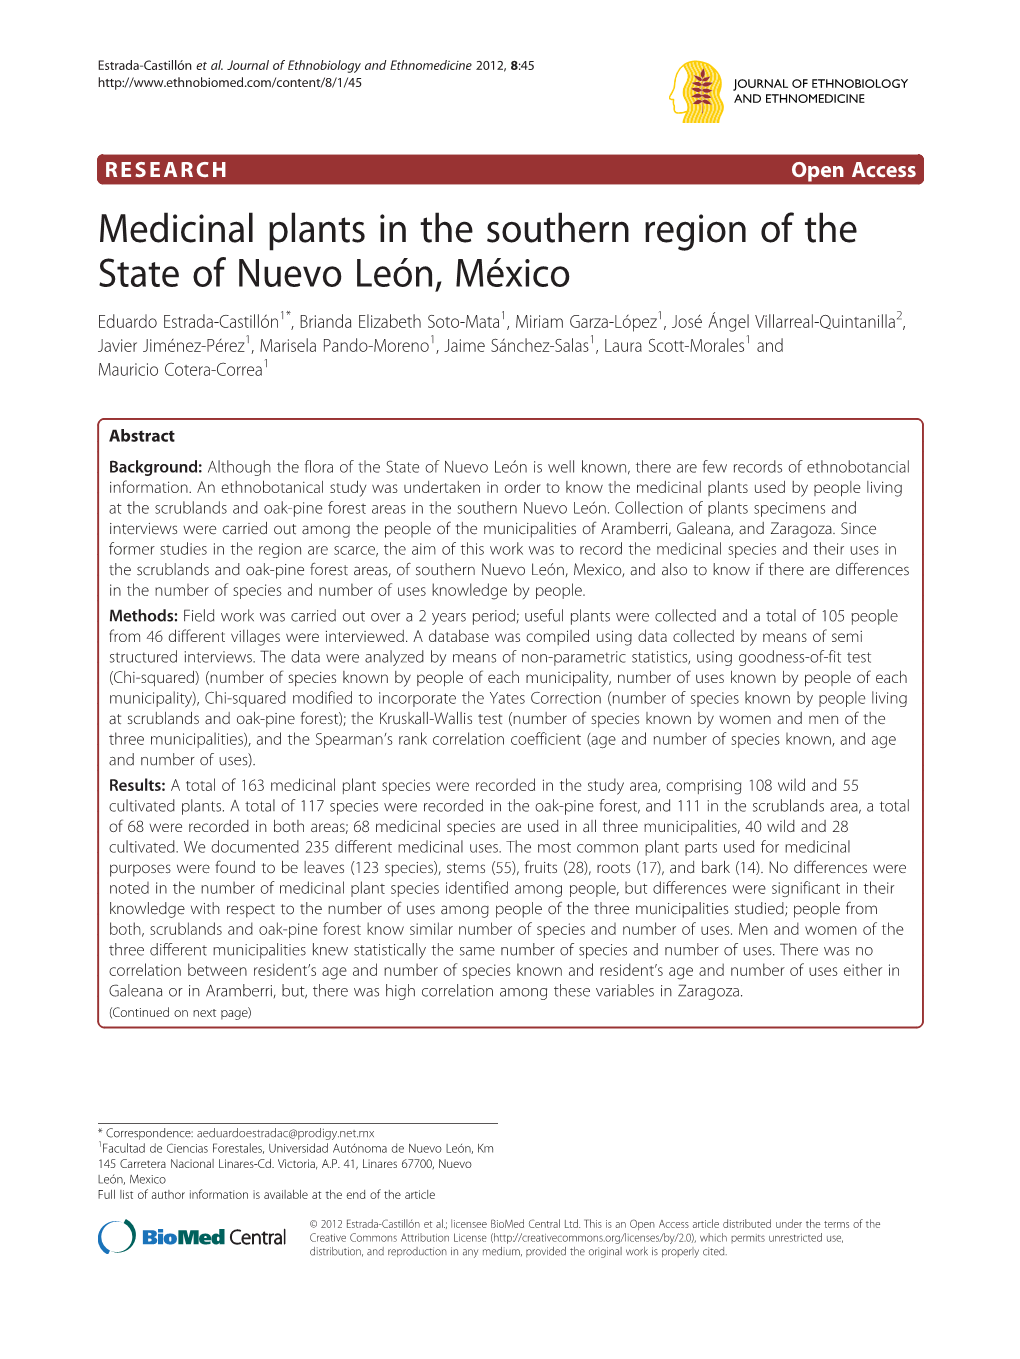 Medicinal Plants in the Southern Region of the State of Nuevo León